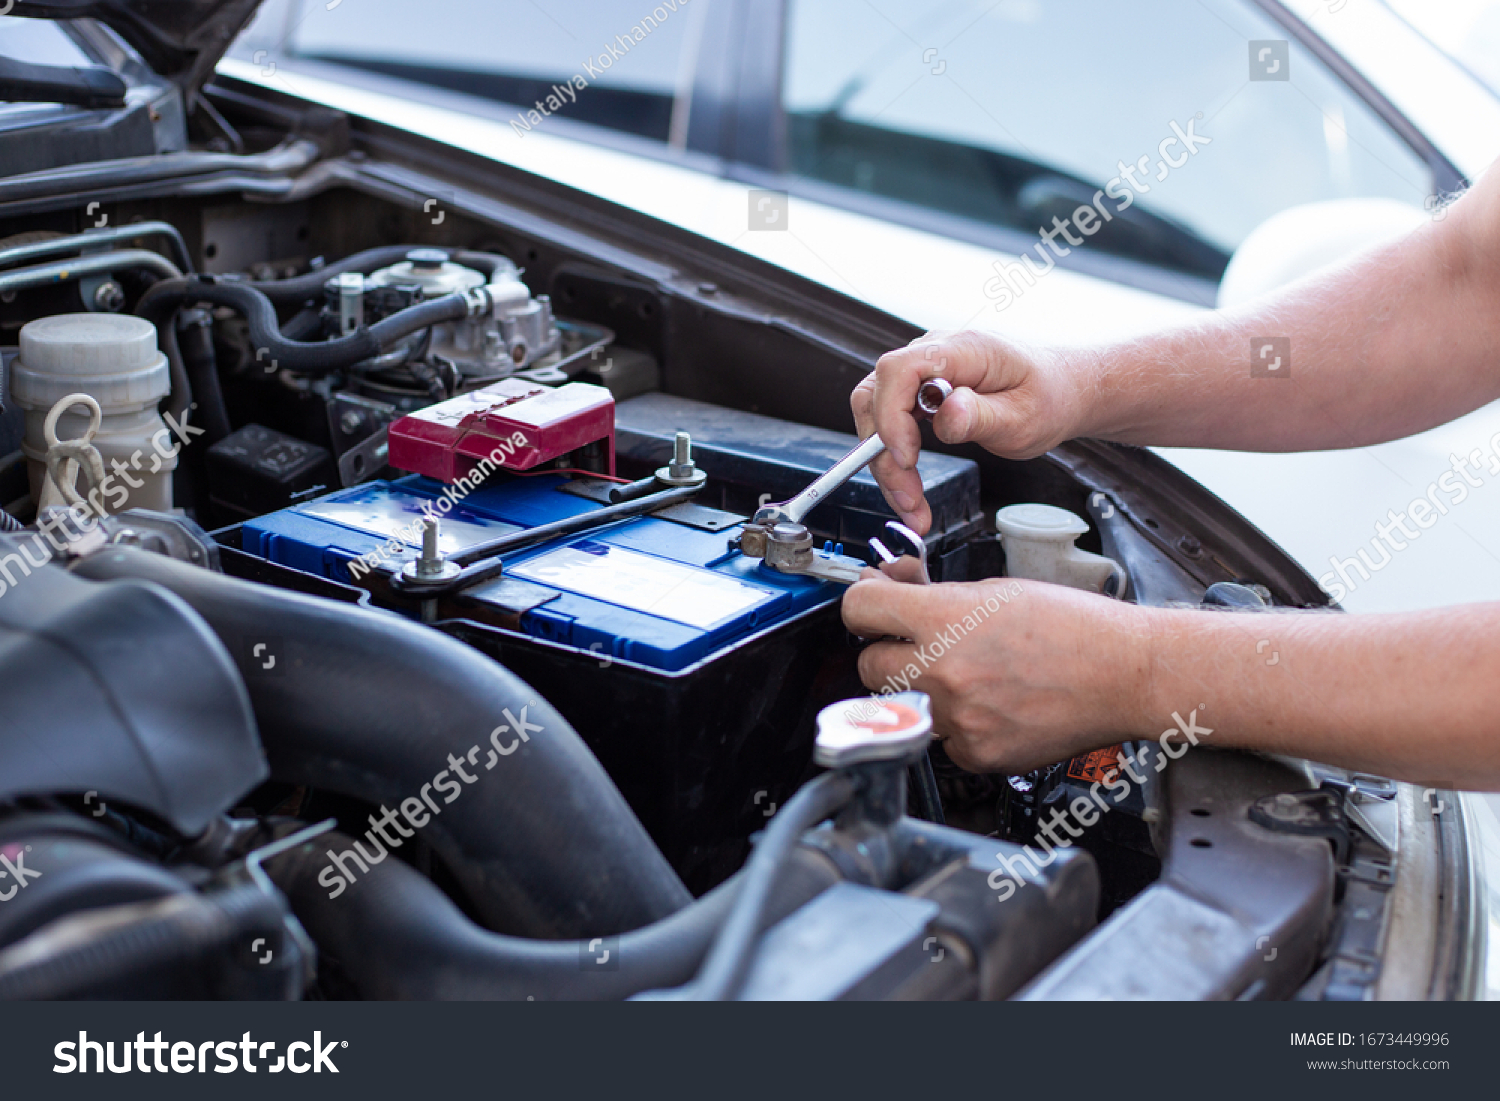 a man tightens with a wrench bolts for fastening a new battery, installing spare parts for a car #1673449996